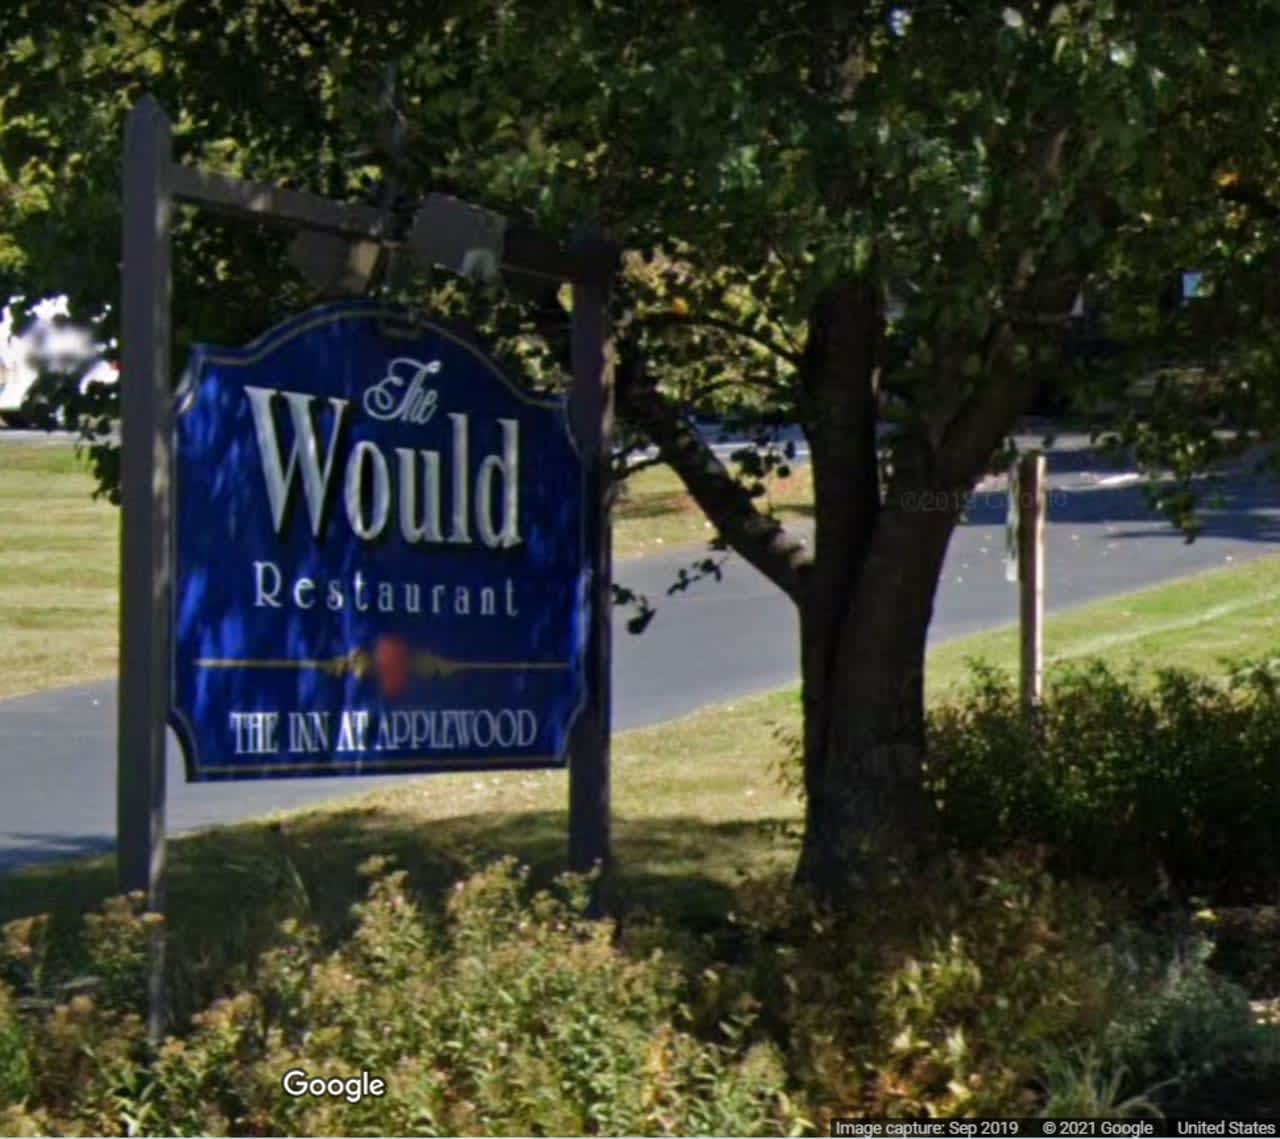 The Would was located at 120 North Road in Highland.